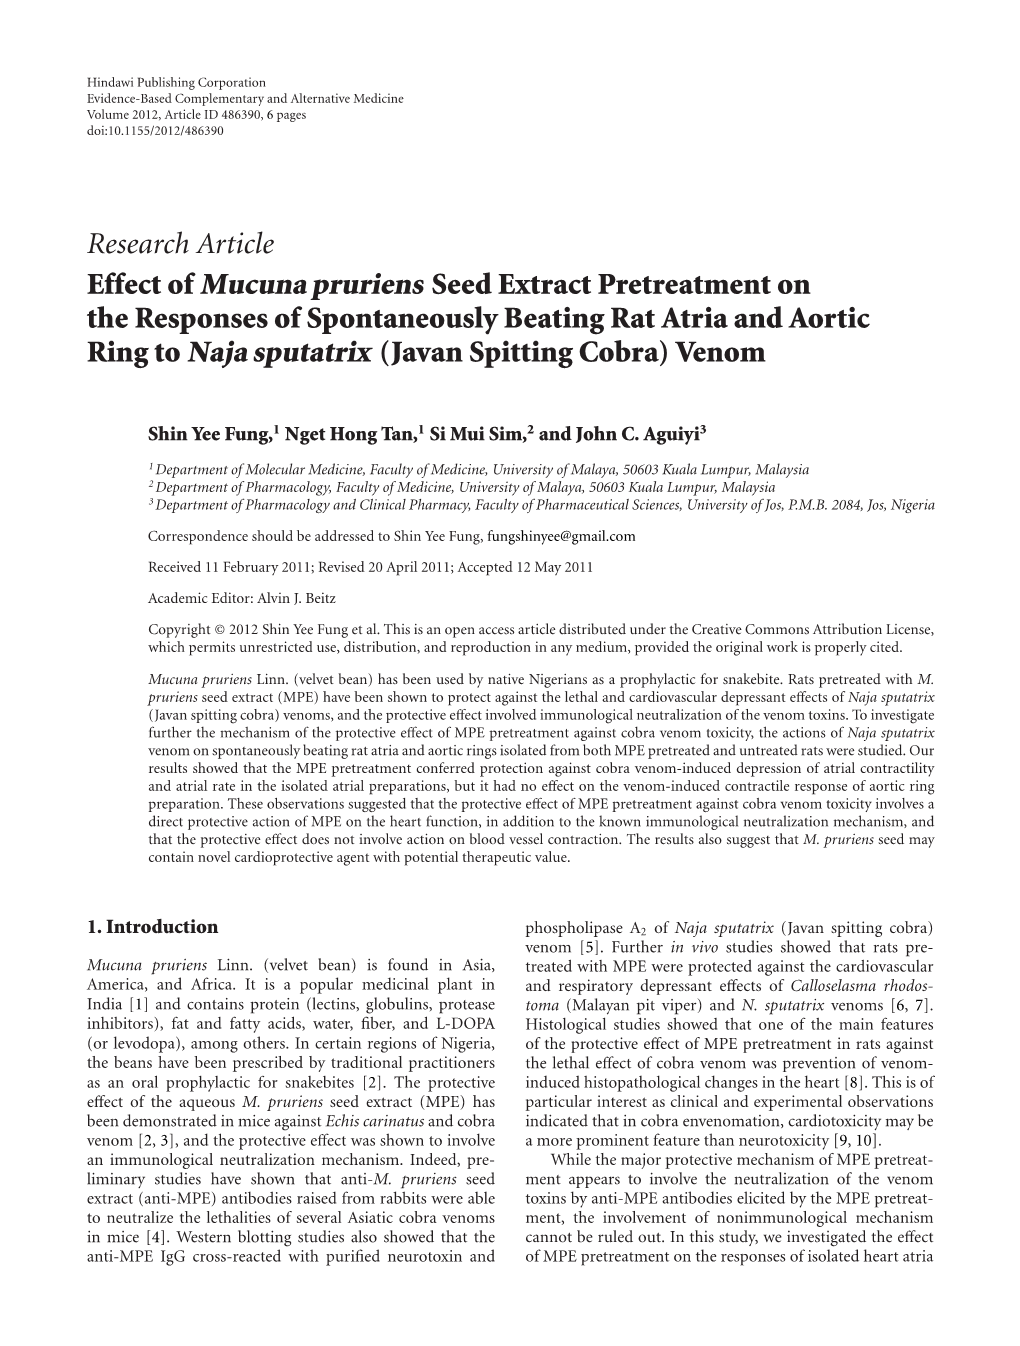 Research Article Effect of Mucuna Pruriens Seed Extract Pretreatment